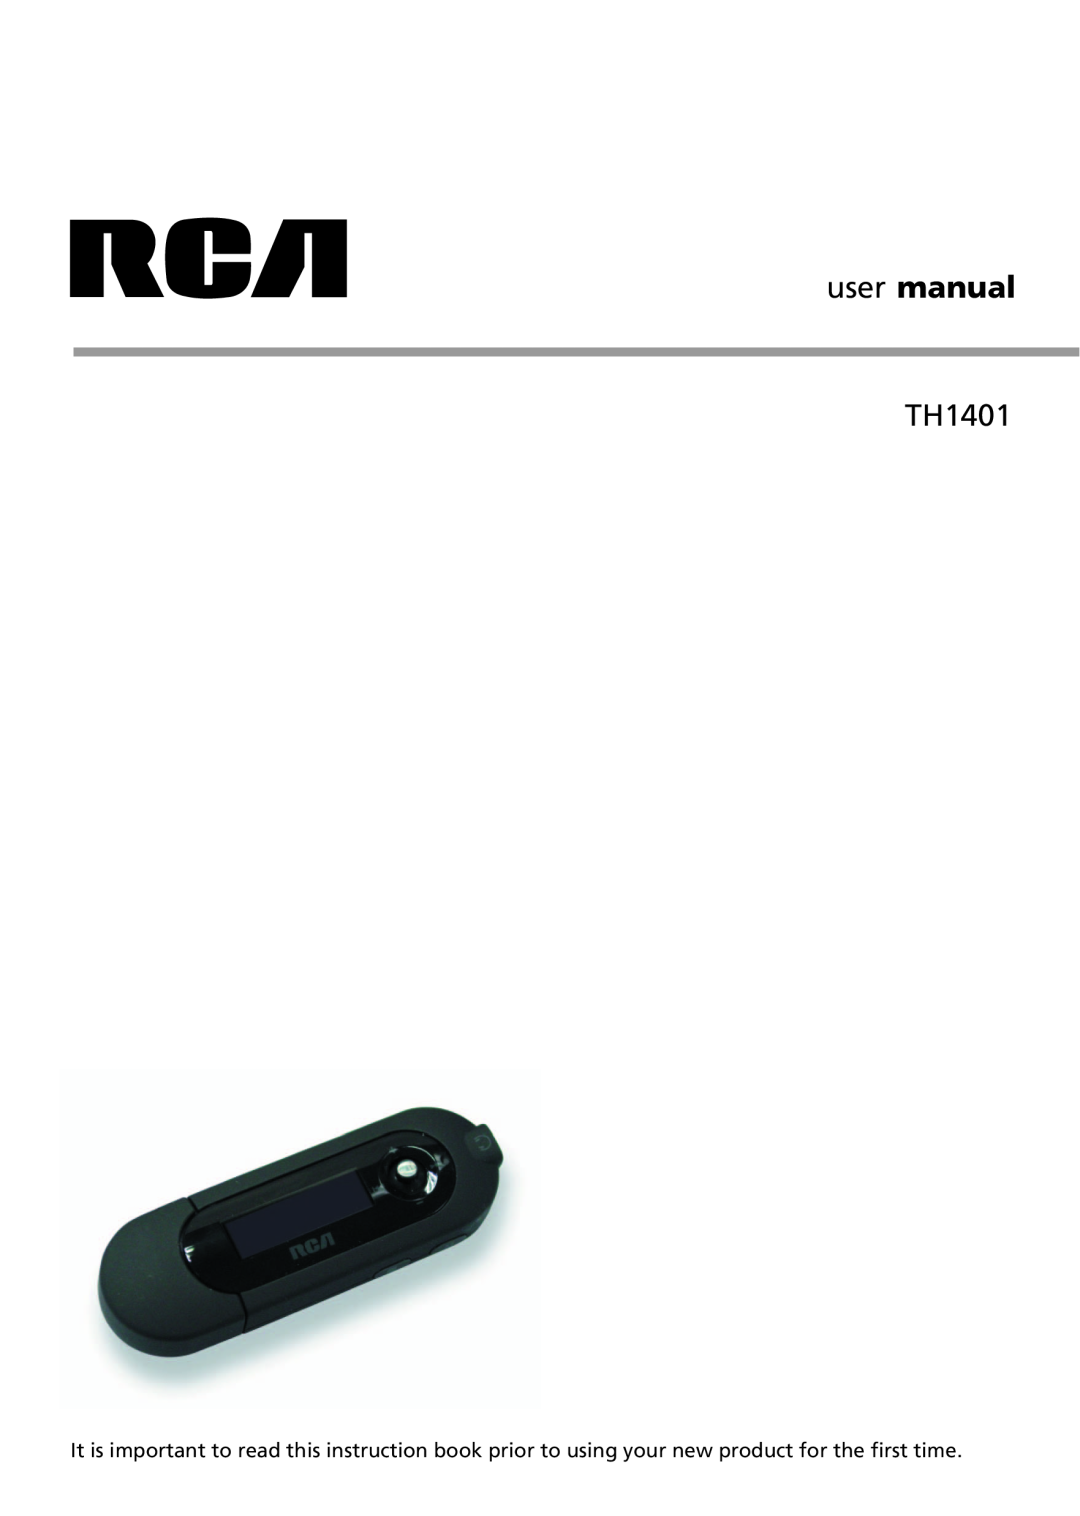 RCA TH1401 quick start QuickStartGuide, Unpacking your player, Getting started, Learn more about the player 